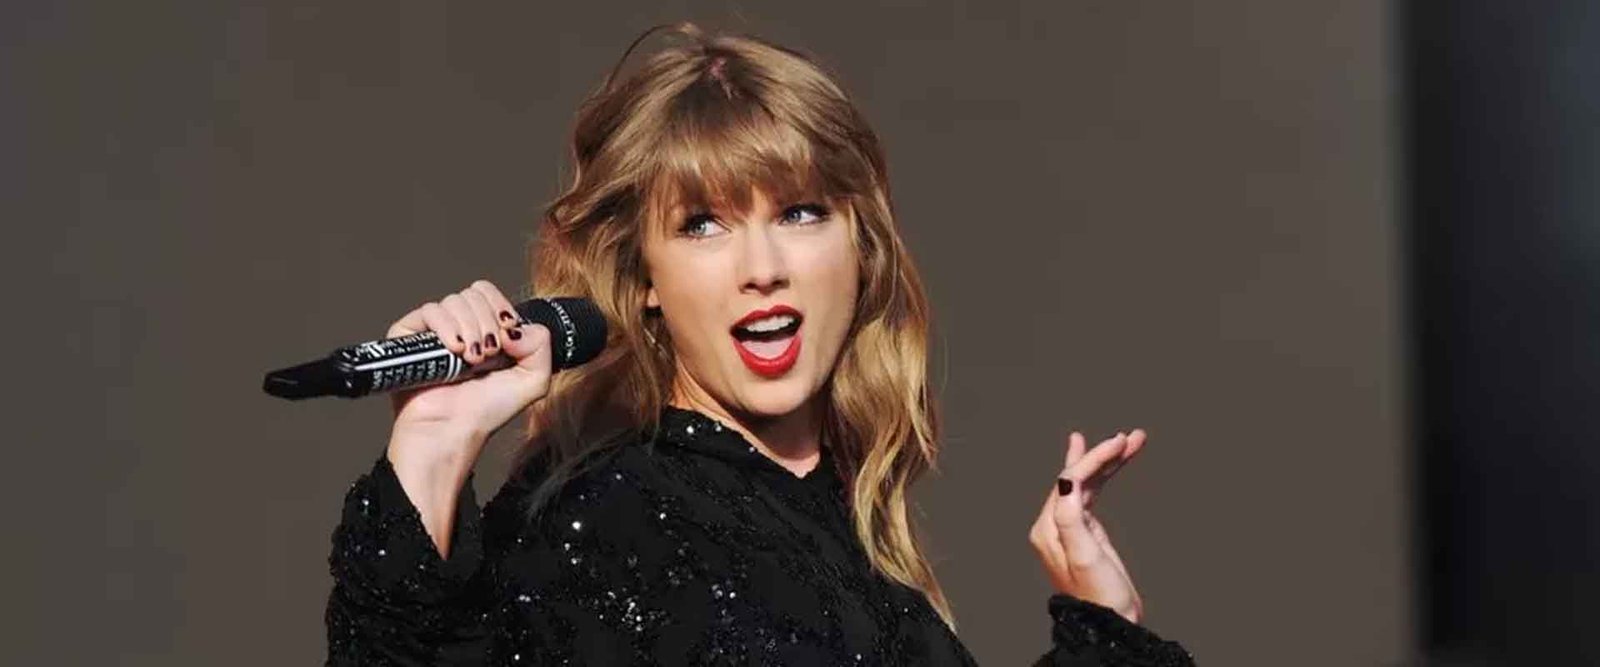 Taylor Swift unexpectedly performed at The 1975's London concert